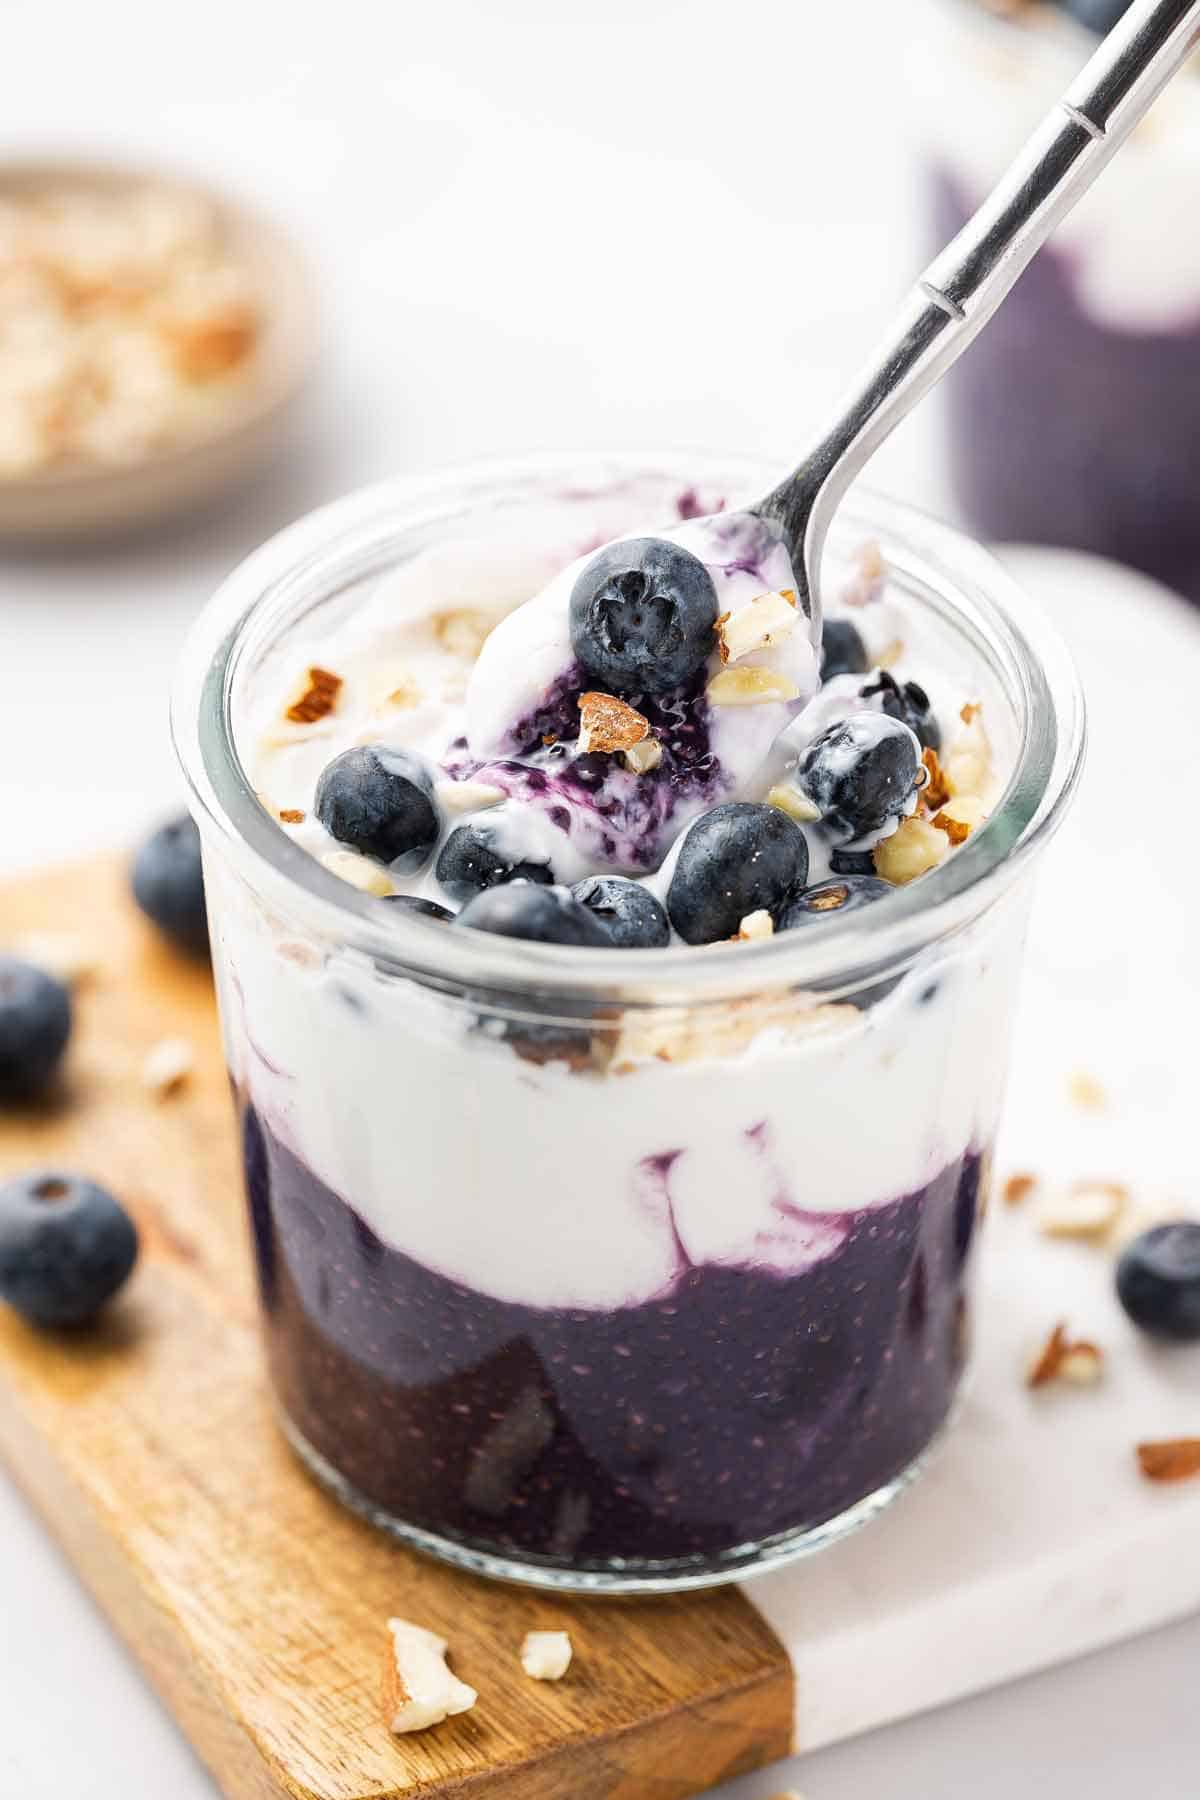 A spoonful of blueberry chia pudding lifted from the glass.